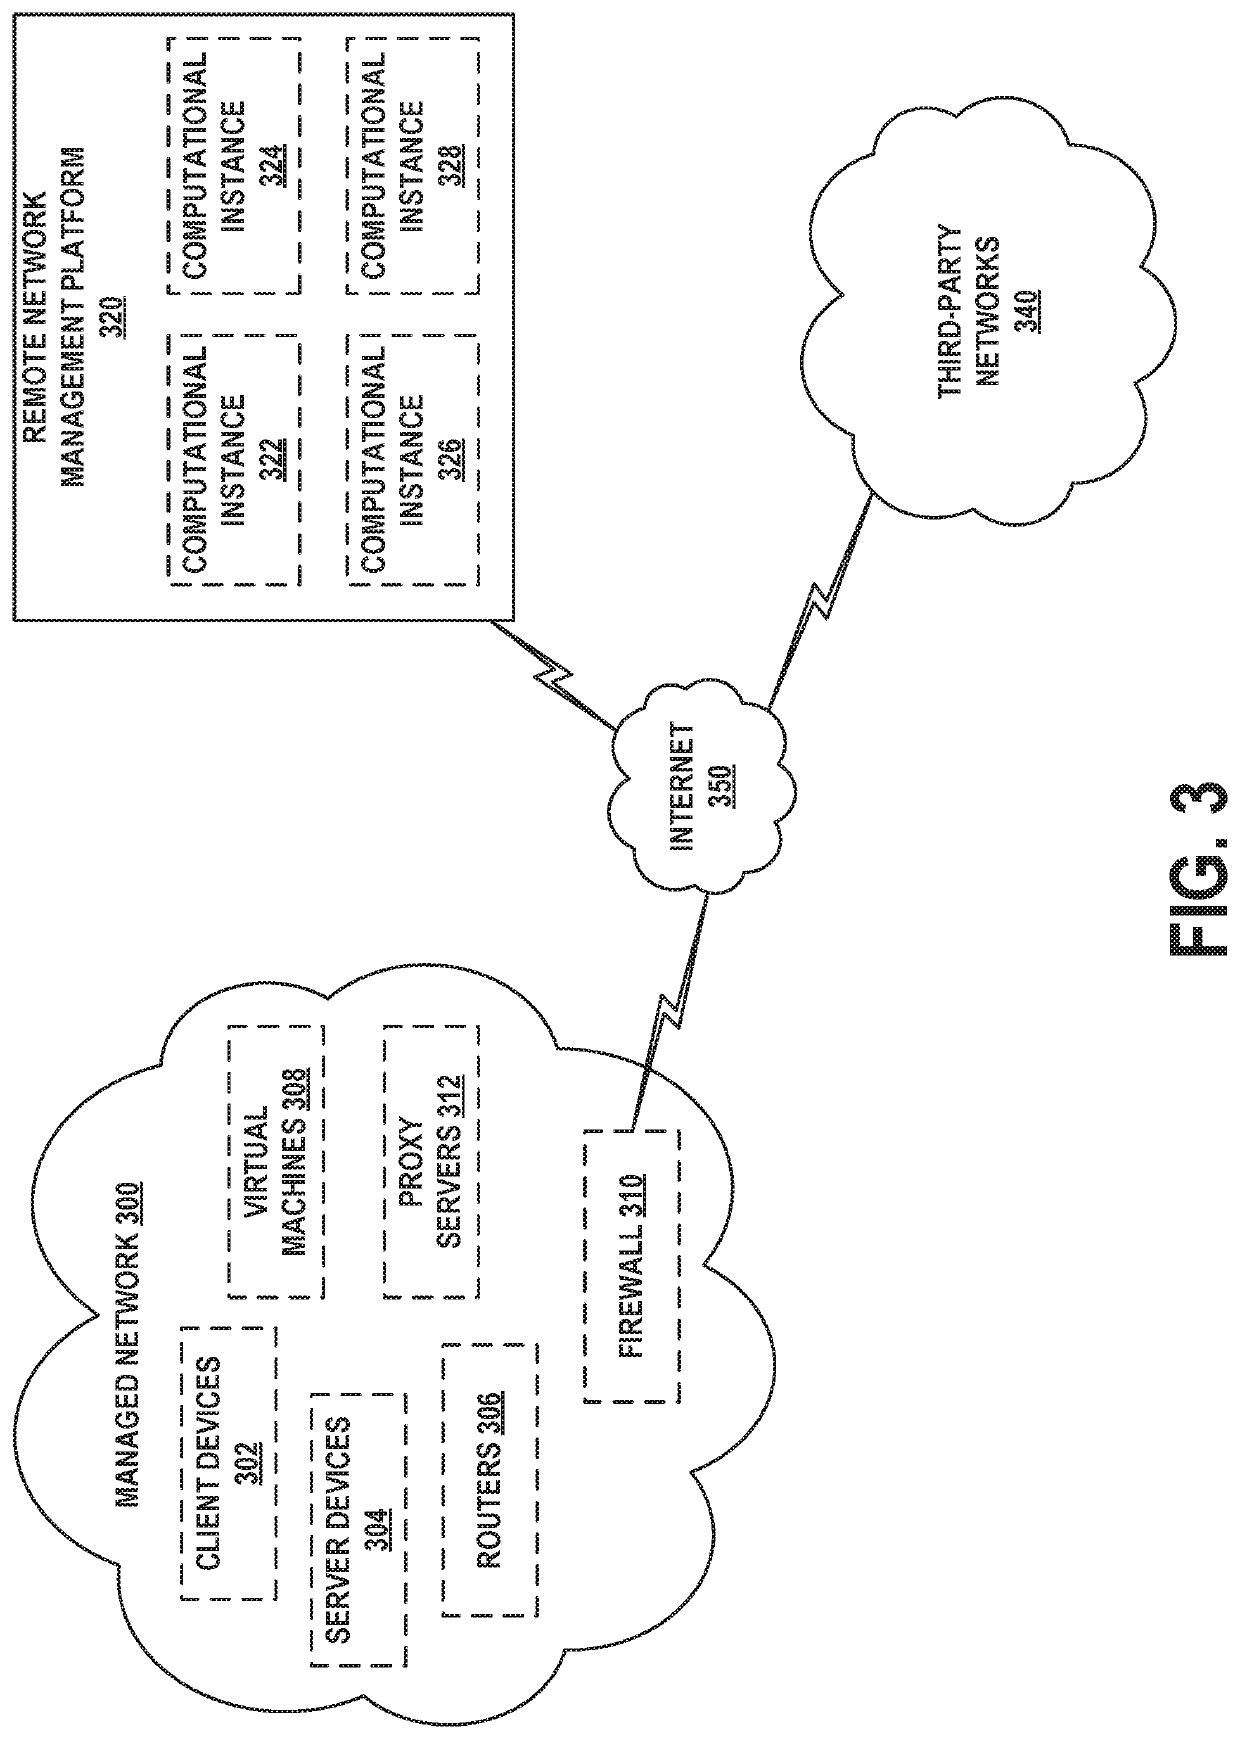 Discovery of remote storage services and associated applications